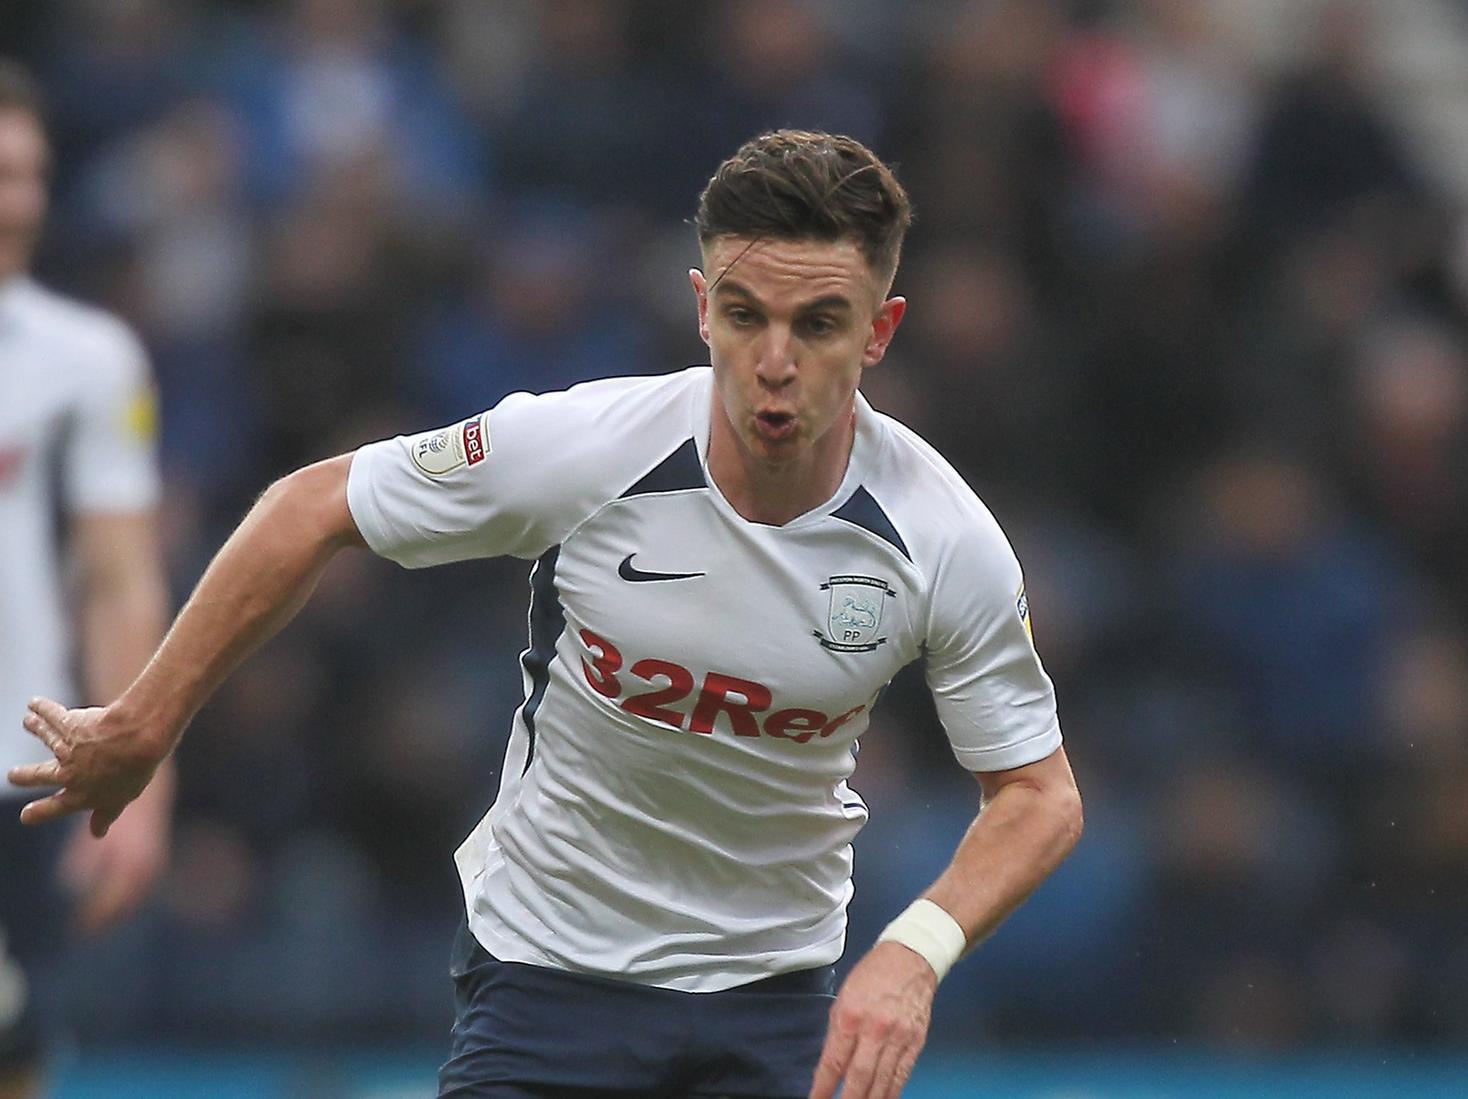 Unlucky to be left out of the starting XI. Came on as a 69th minutes substitute for Sinclair. Didn't really get the chance to show his attacking intent with PNE having defending to do.